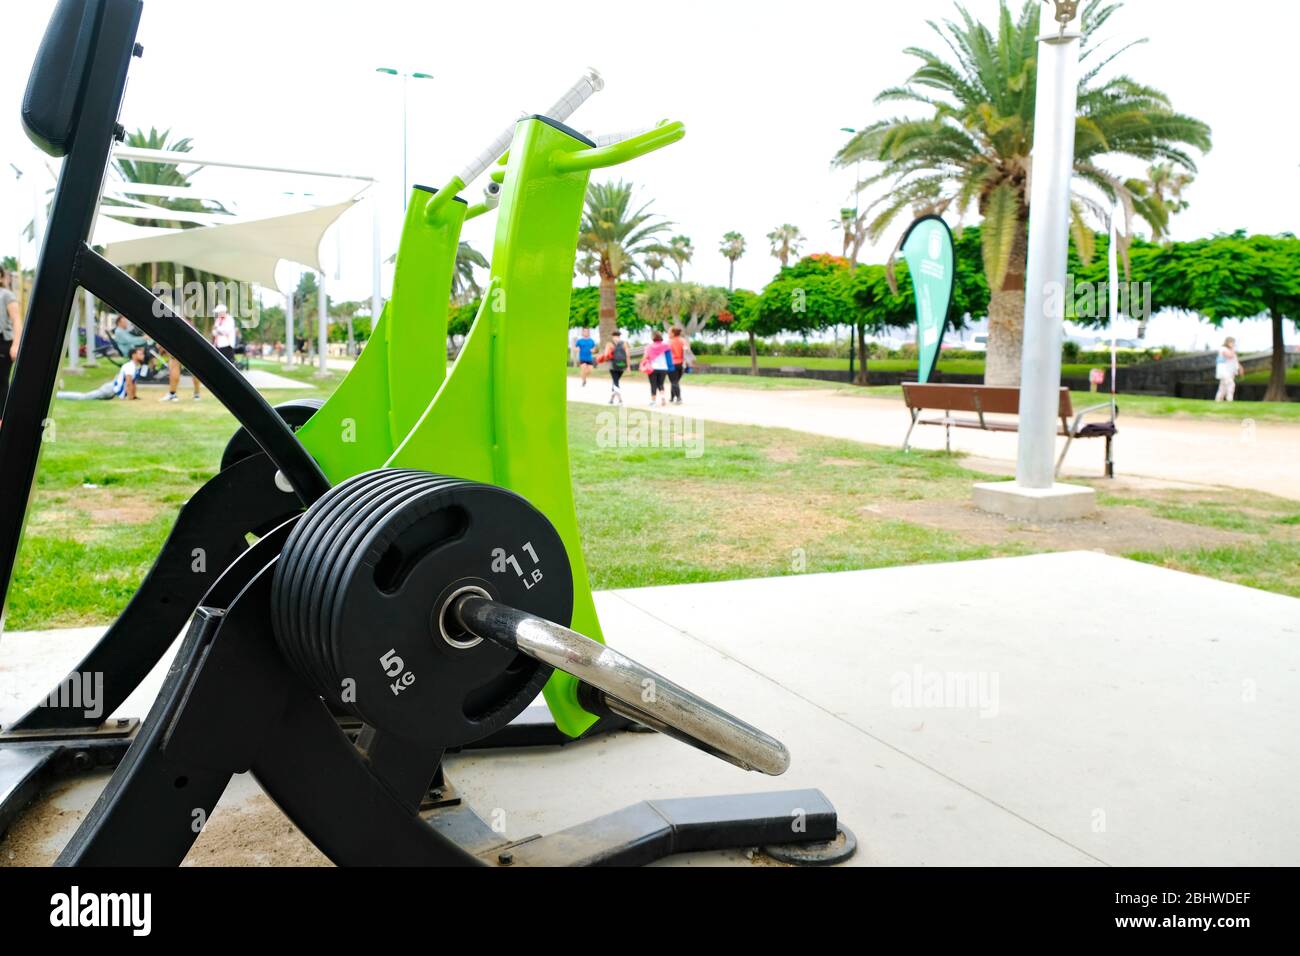 Public fitness training machines (public gym) in the city park. Stock Photo